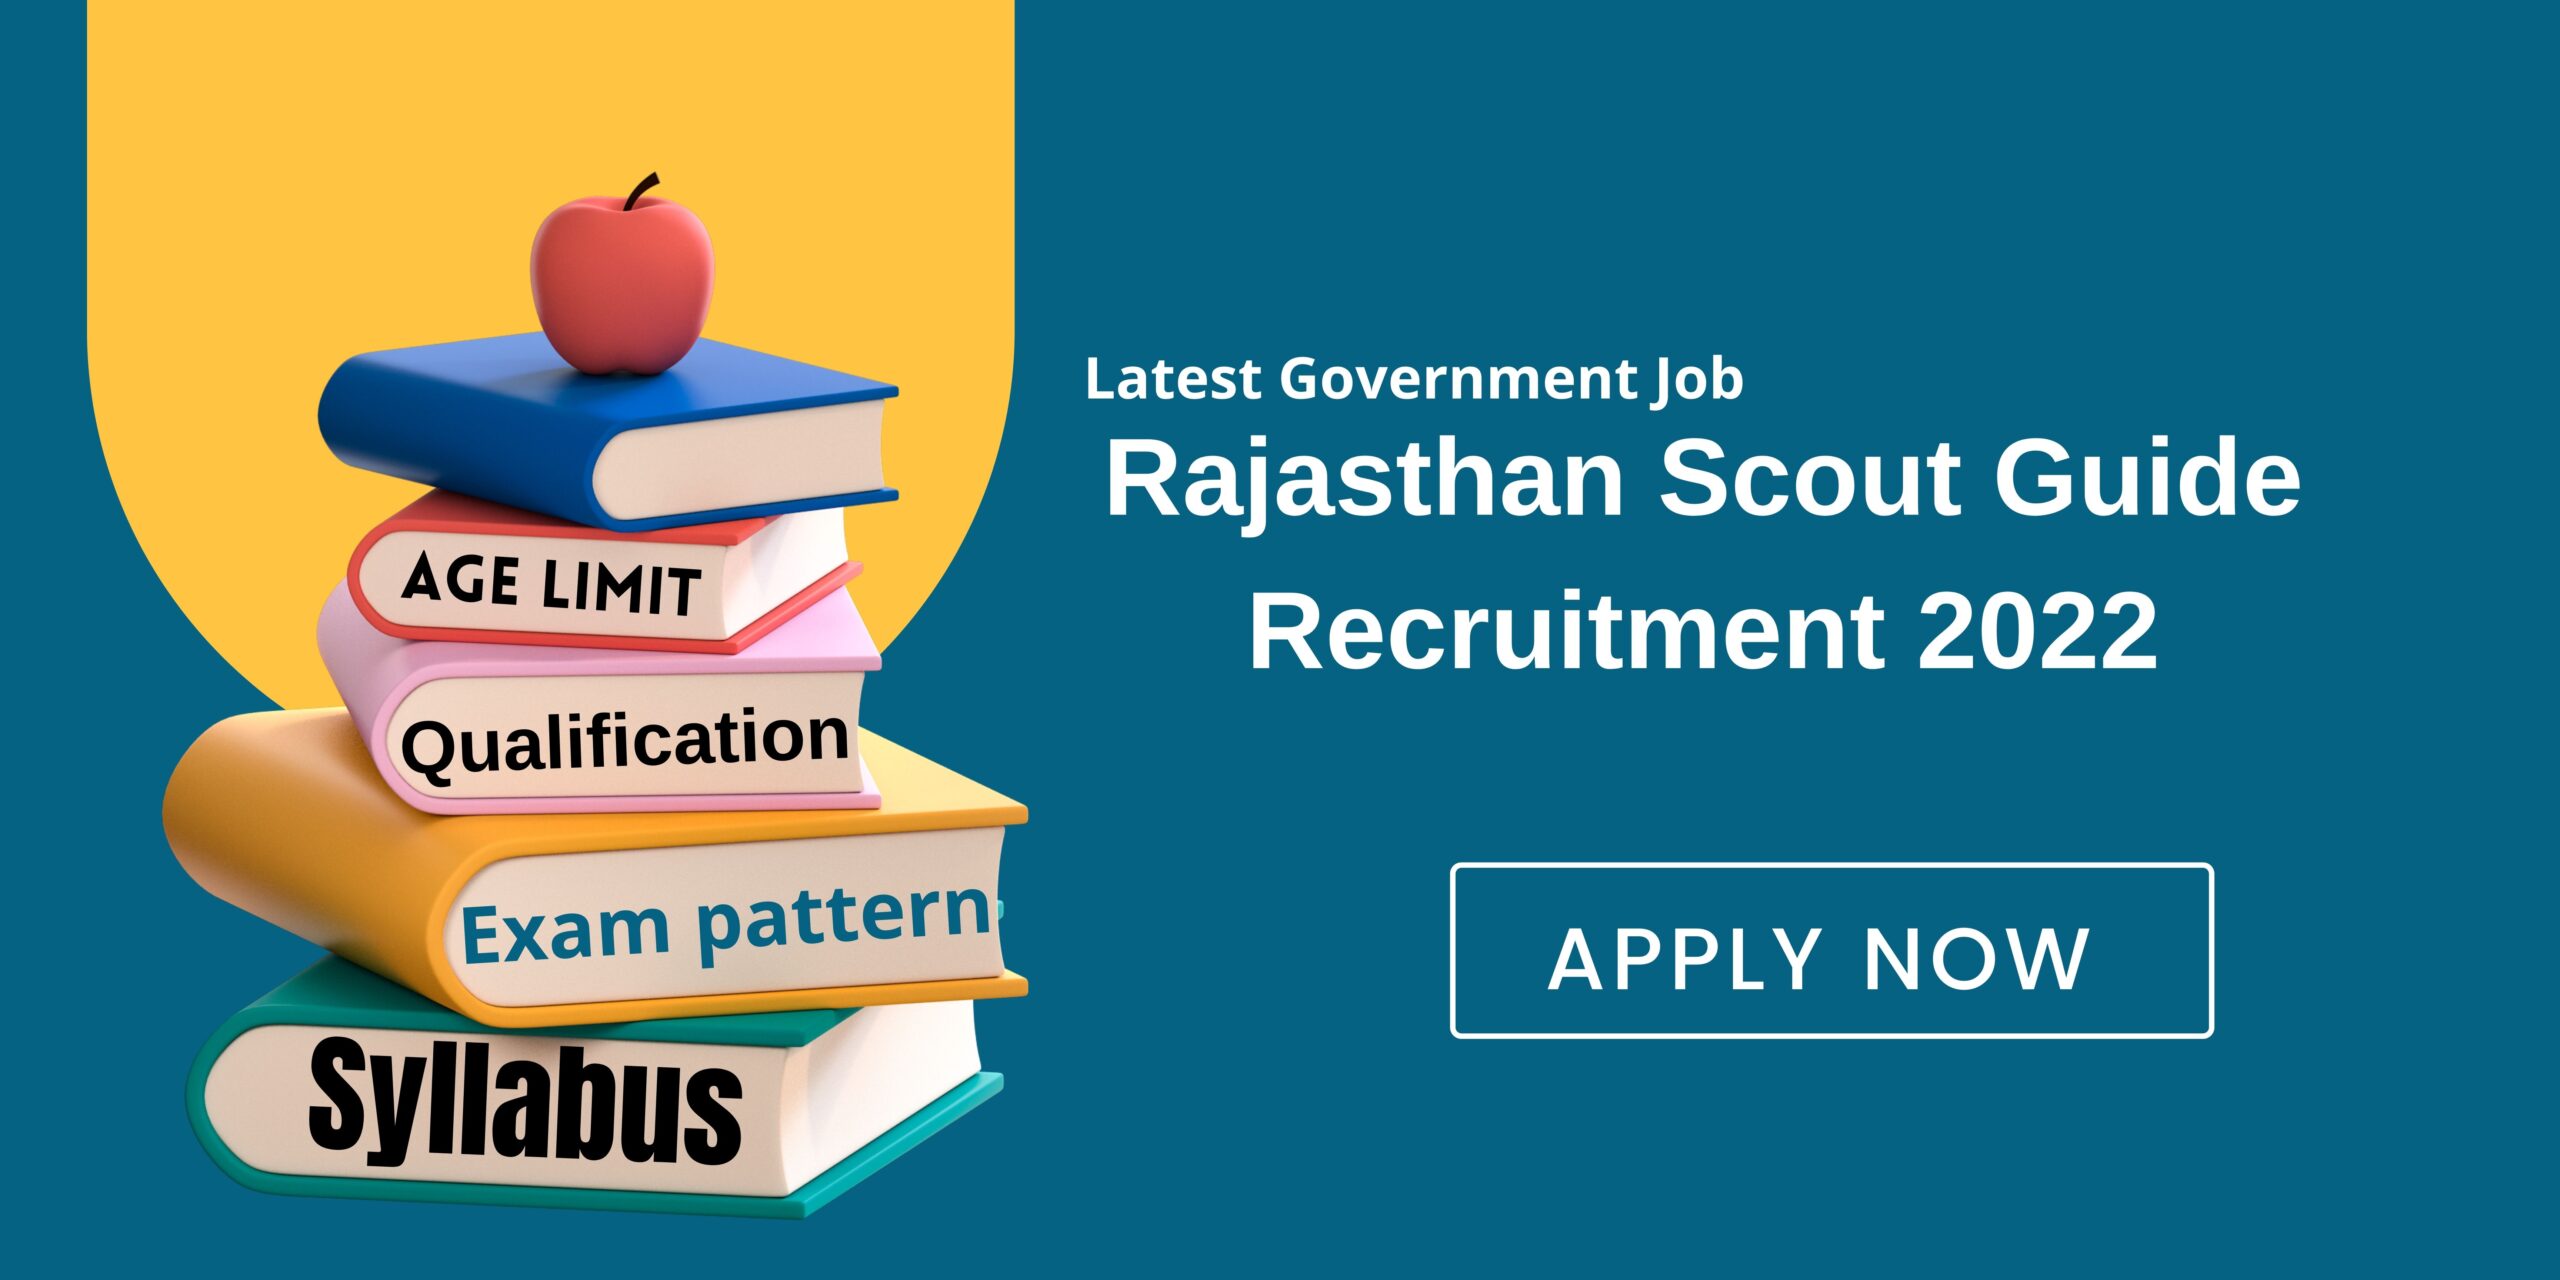 Rajasthan Scout Guide Recruitment 2022